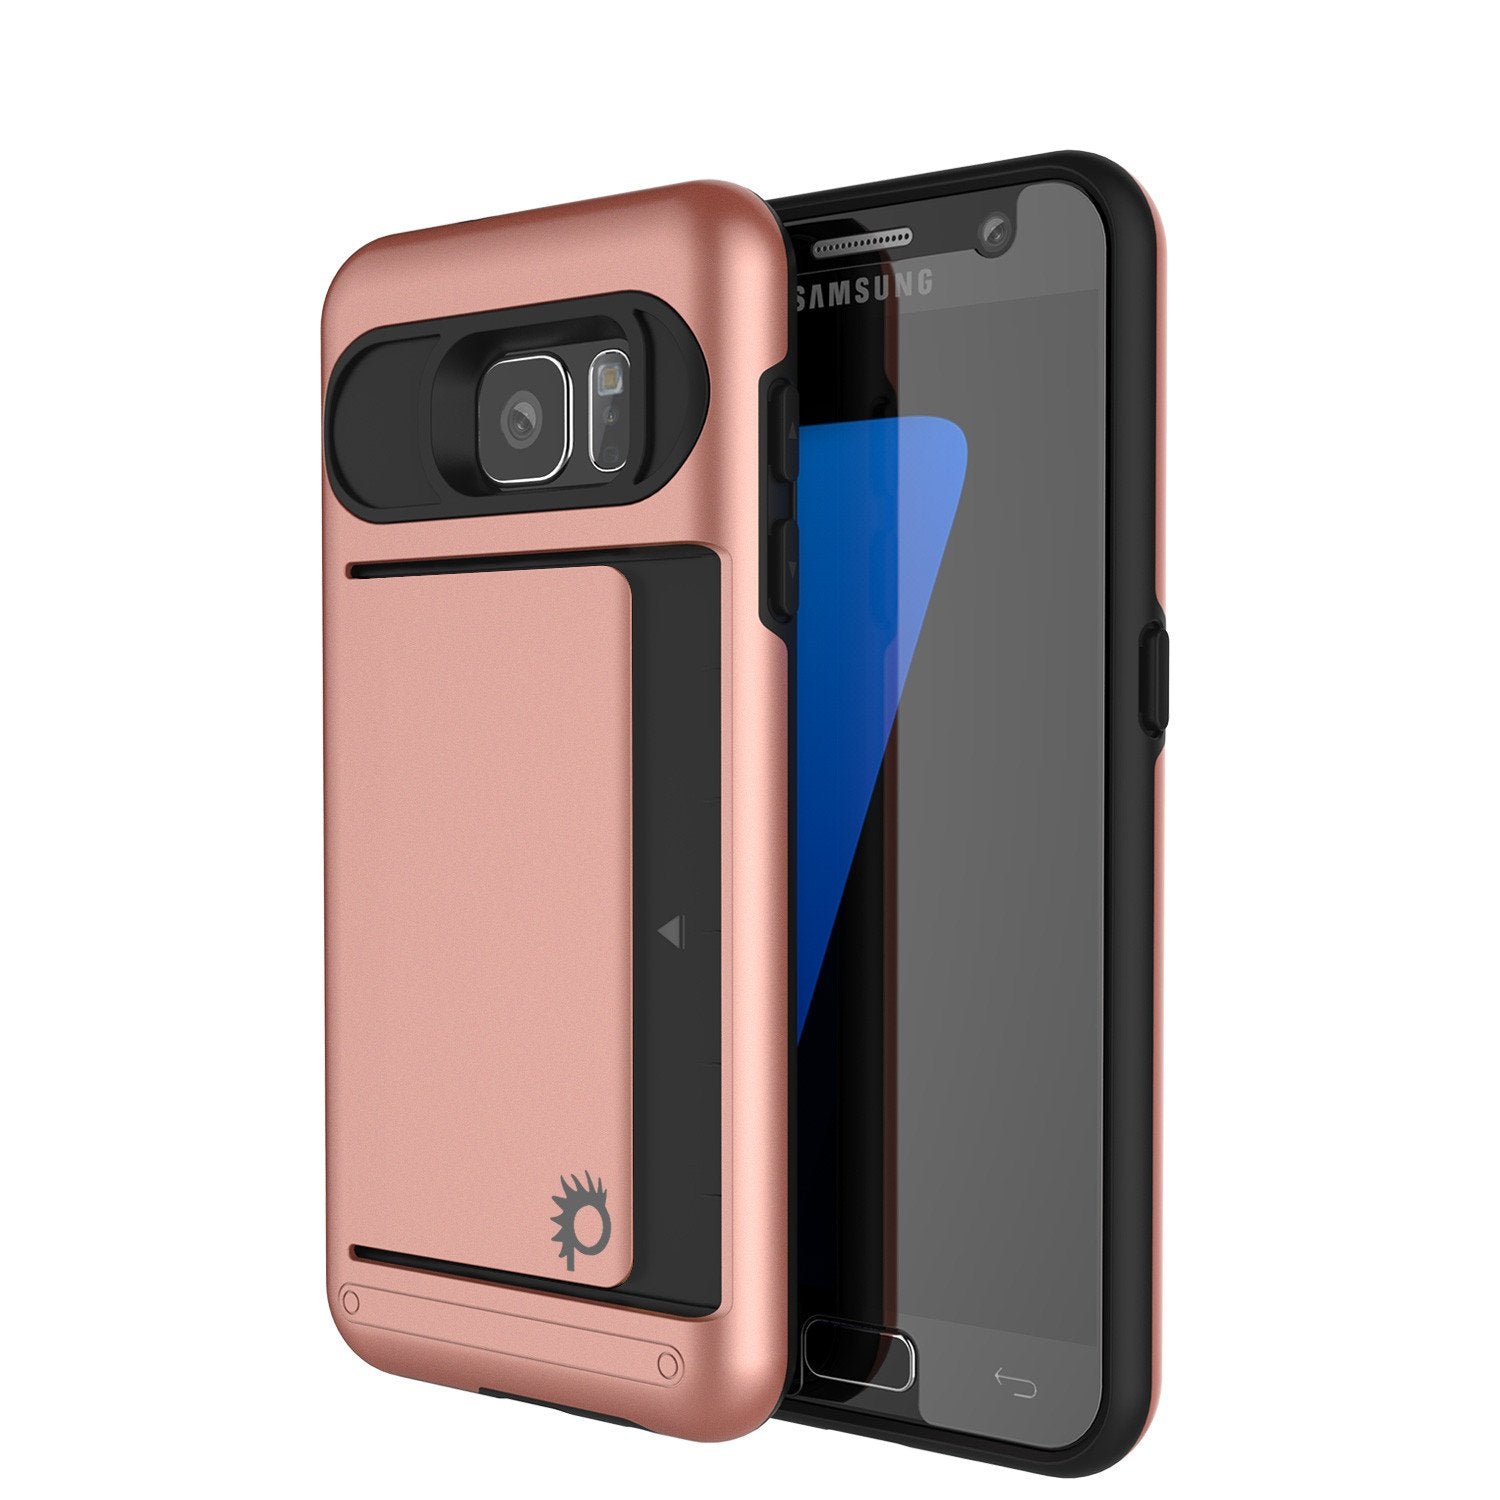 Galaxy S7 EDGE Case PunkCase CLUTCH Rose Gold Series Slim Armor Soft Cover Case w/ Screen Protector - PunkCase NZ